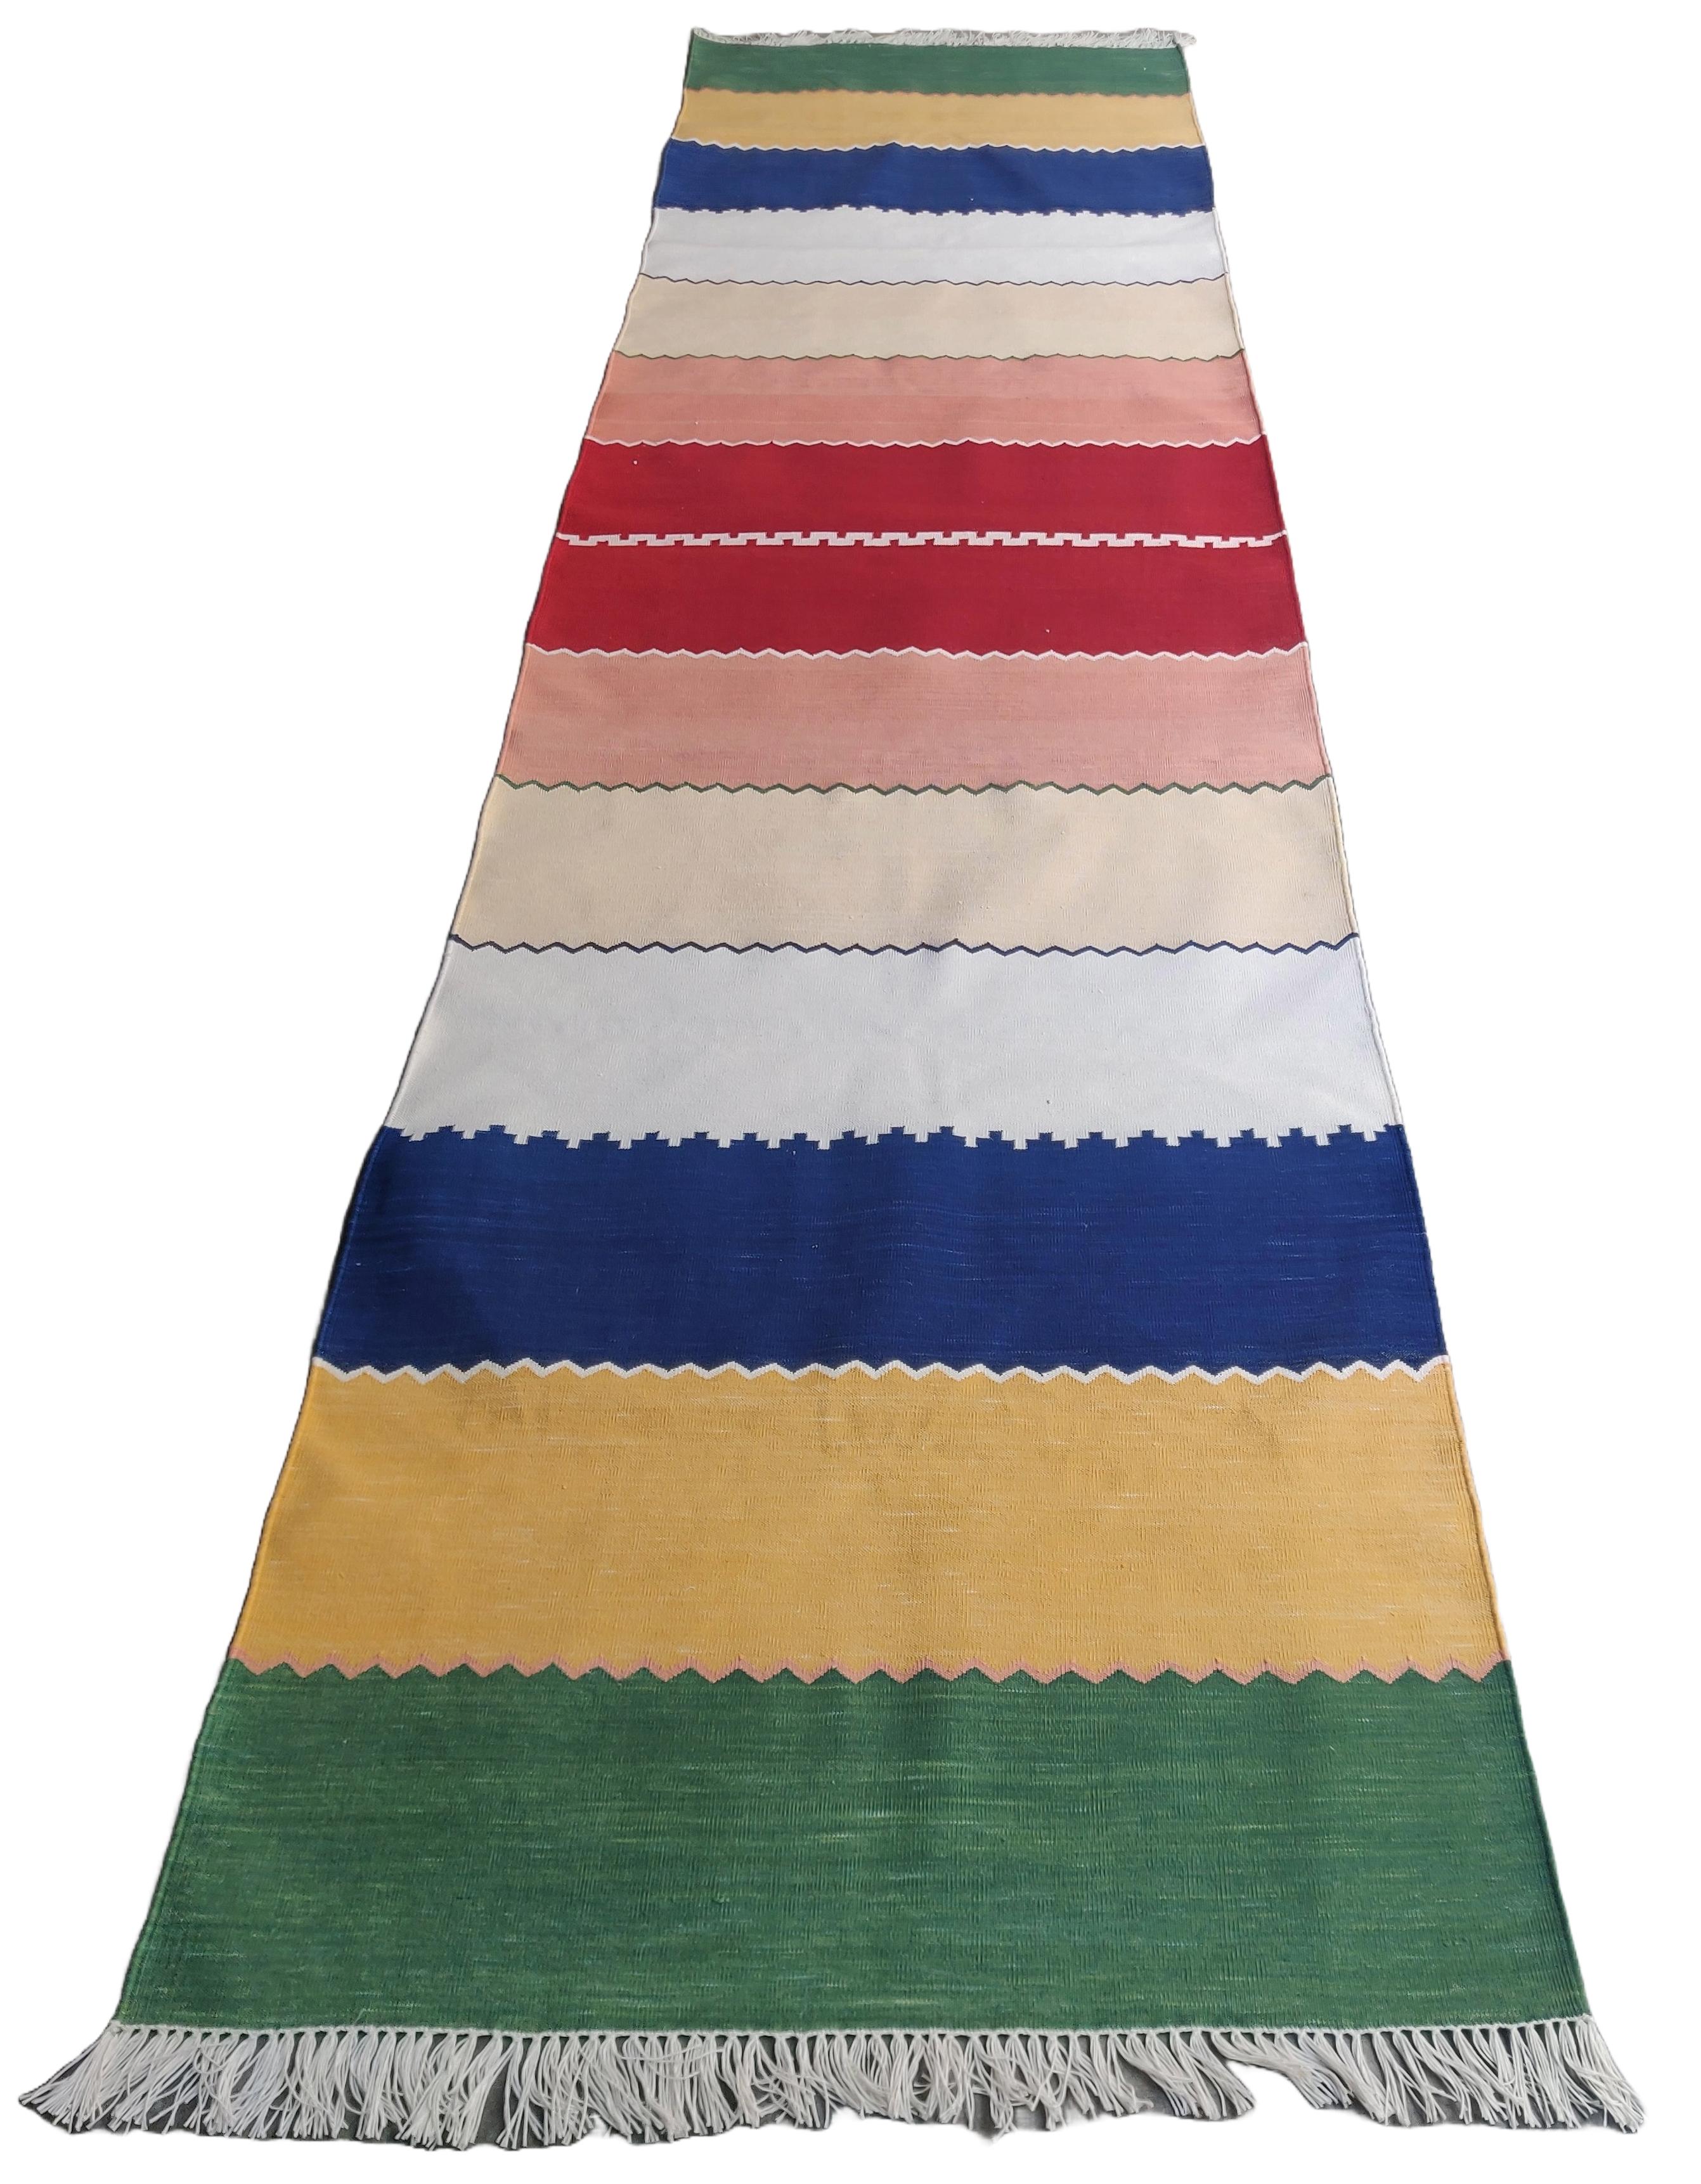 Cotton Natural Vegetable Dyed, Green, Mustard, Blue, Cream, Pink & Red Striped Indian Dhurrie Runner-3'x12'
These special flat-weave dhurries are hand-woven with 15 ply 100% cotton yarn. Due to the special manufacturing techniques used to create our